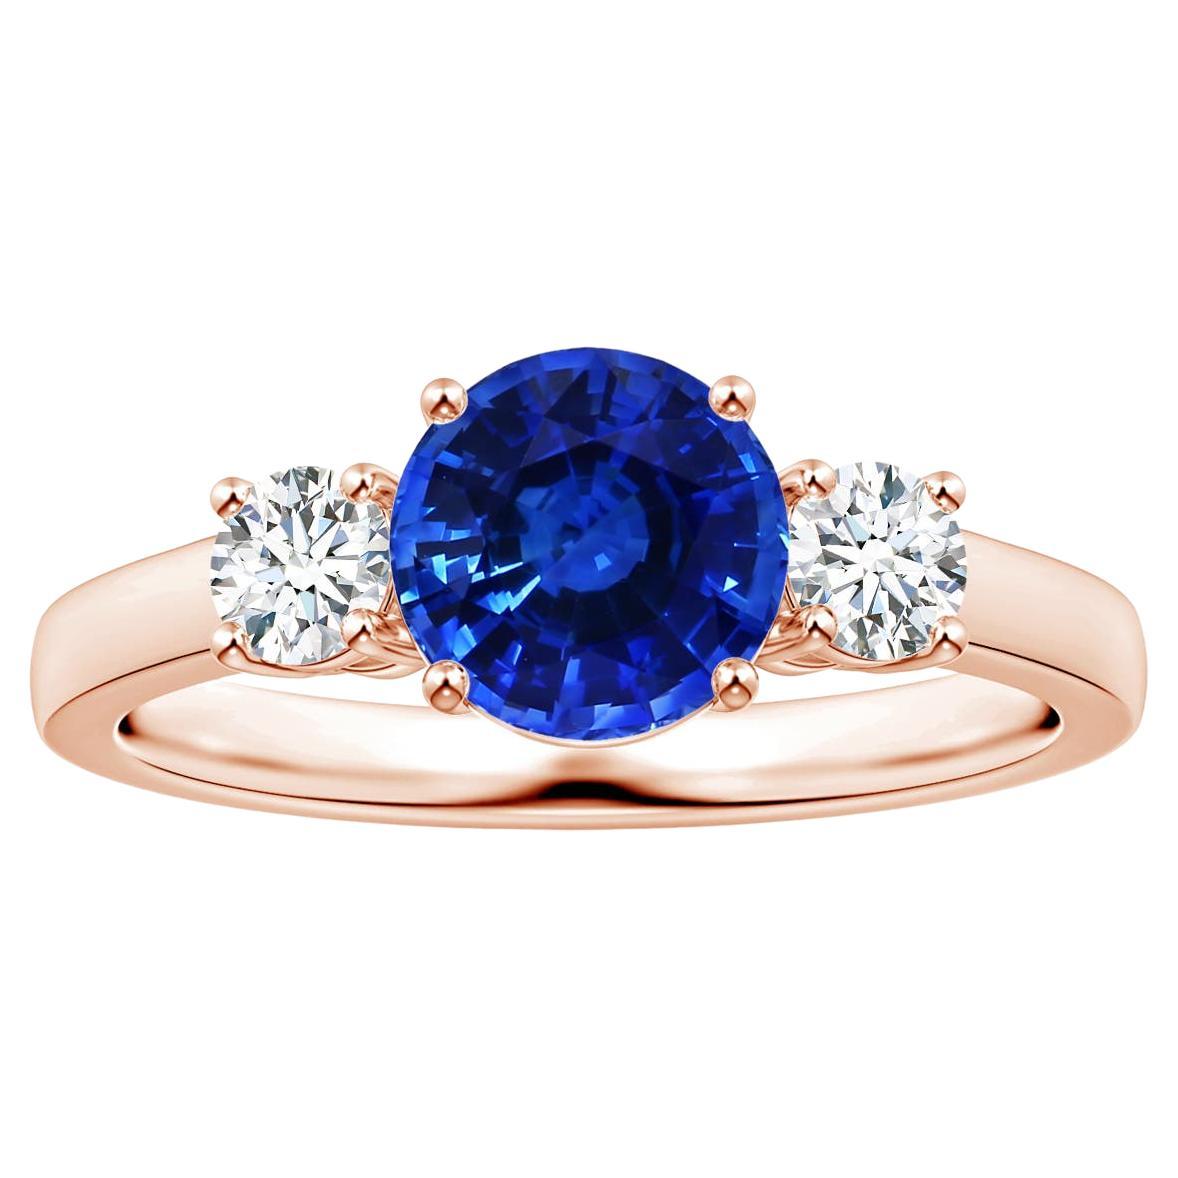 ANGARA Three stone GIA Certified Blue Sapphire Ring in Rose Gold with Diamonds